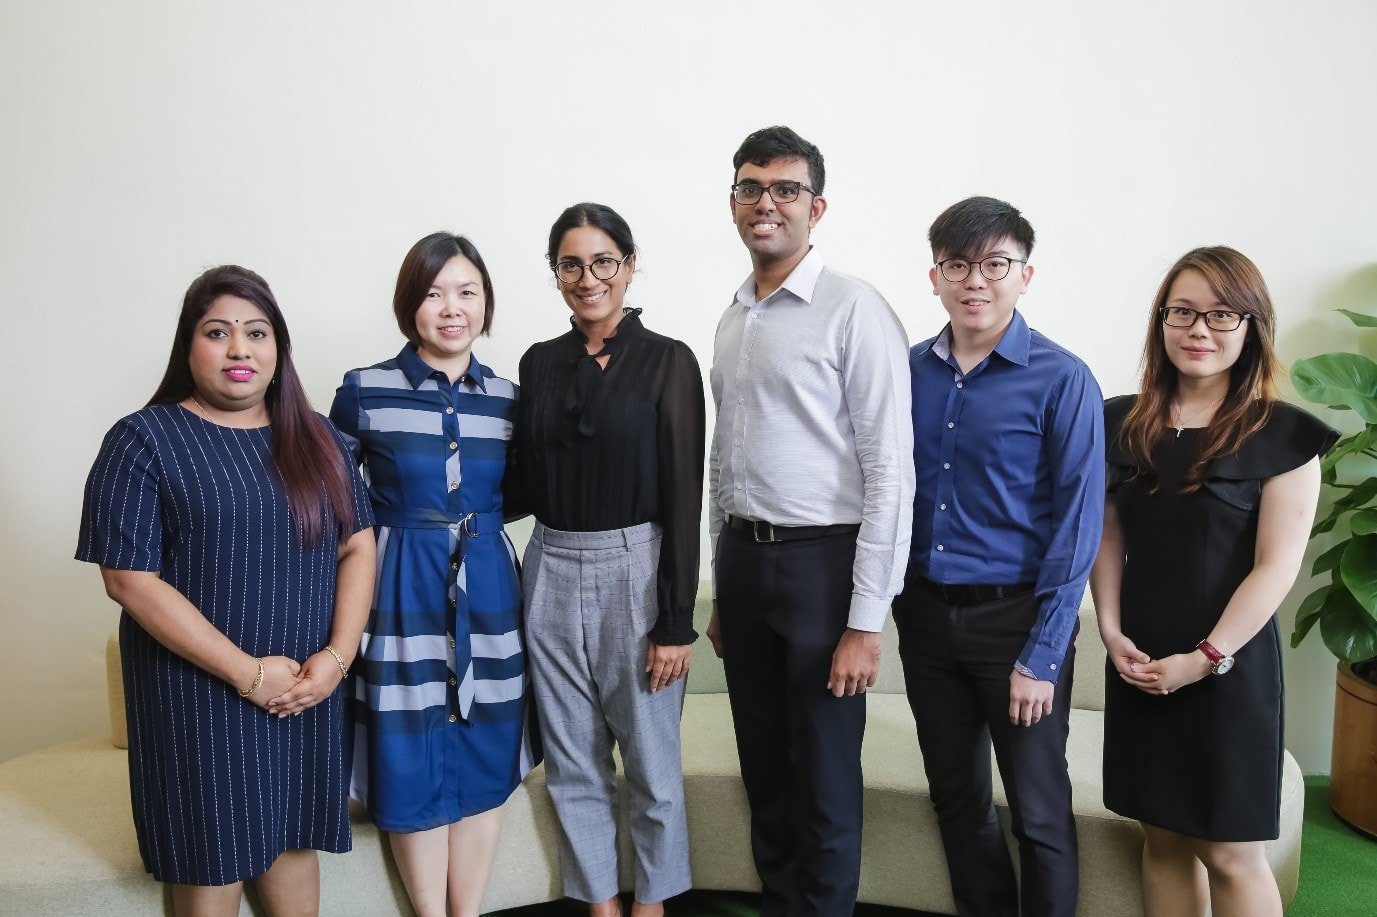 Category 1 Winners for 2019 
First row from left to right: Inthumathi d/o Manivasan (Special Award), Valerie Lee Siaw Ping (Special Award), Khala Dhatchaini Segaran, Dinesh Samuel Mathew, Wade Shon Fan, Stephanie Poh Ping Hui 